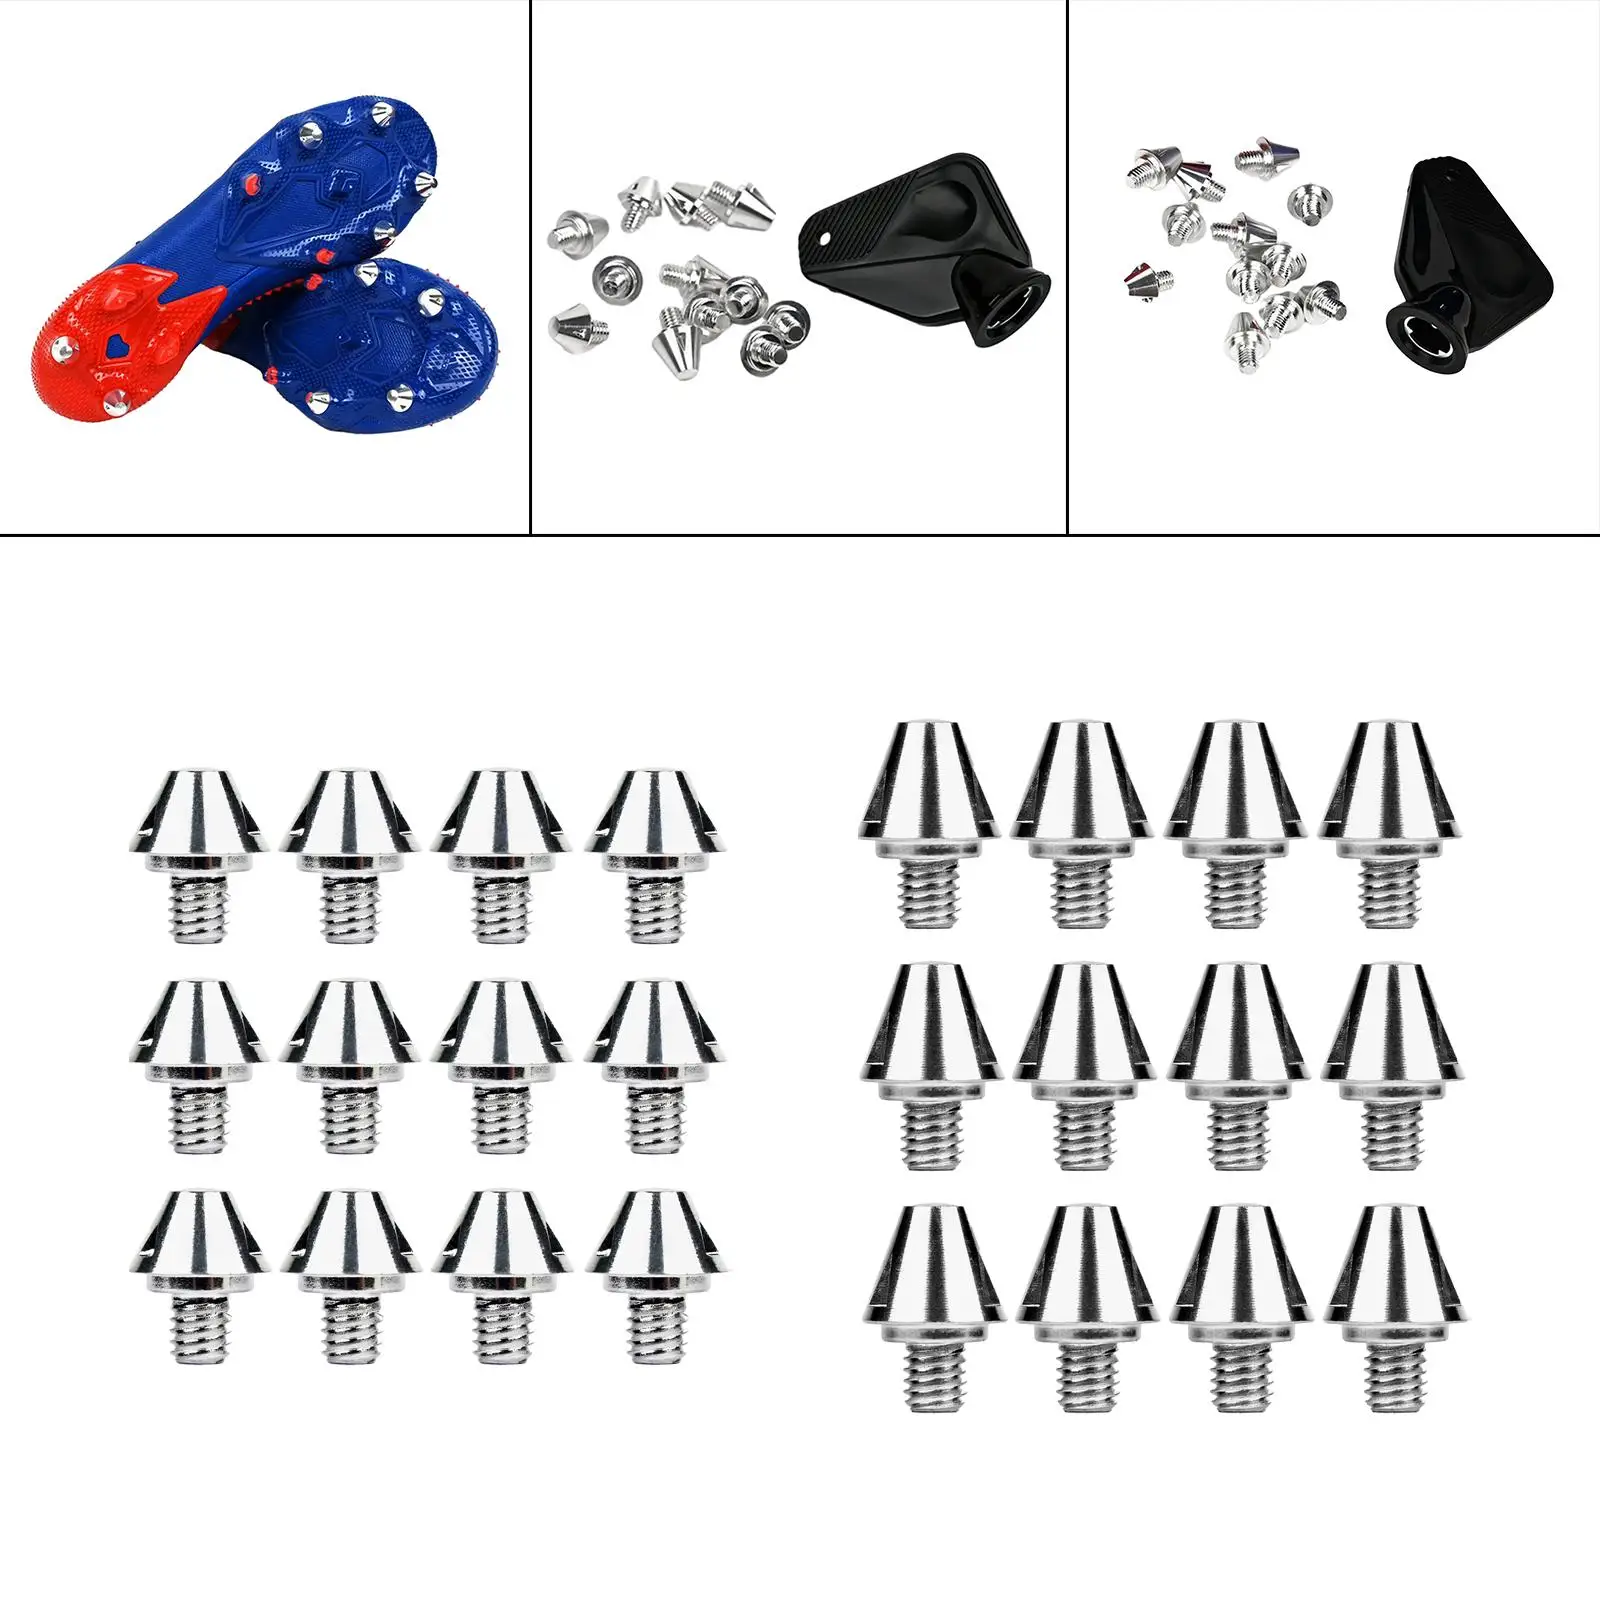 12x Rugby Studs Universal Anti Slip M6 Threaded Soccer Studs Track Shoes Spikes for Competition Indoor Outdoor Sports Training